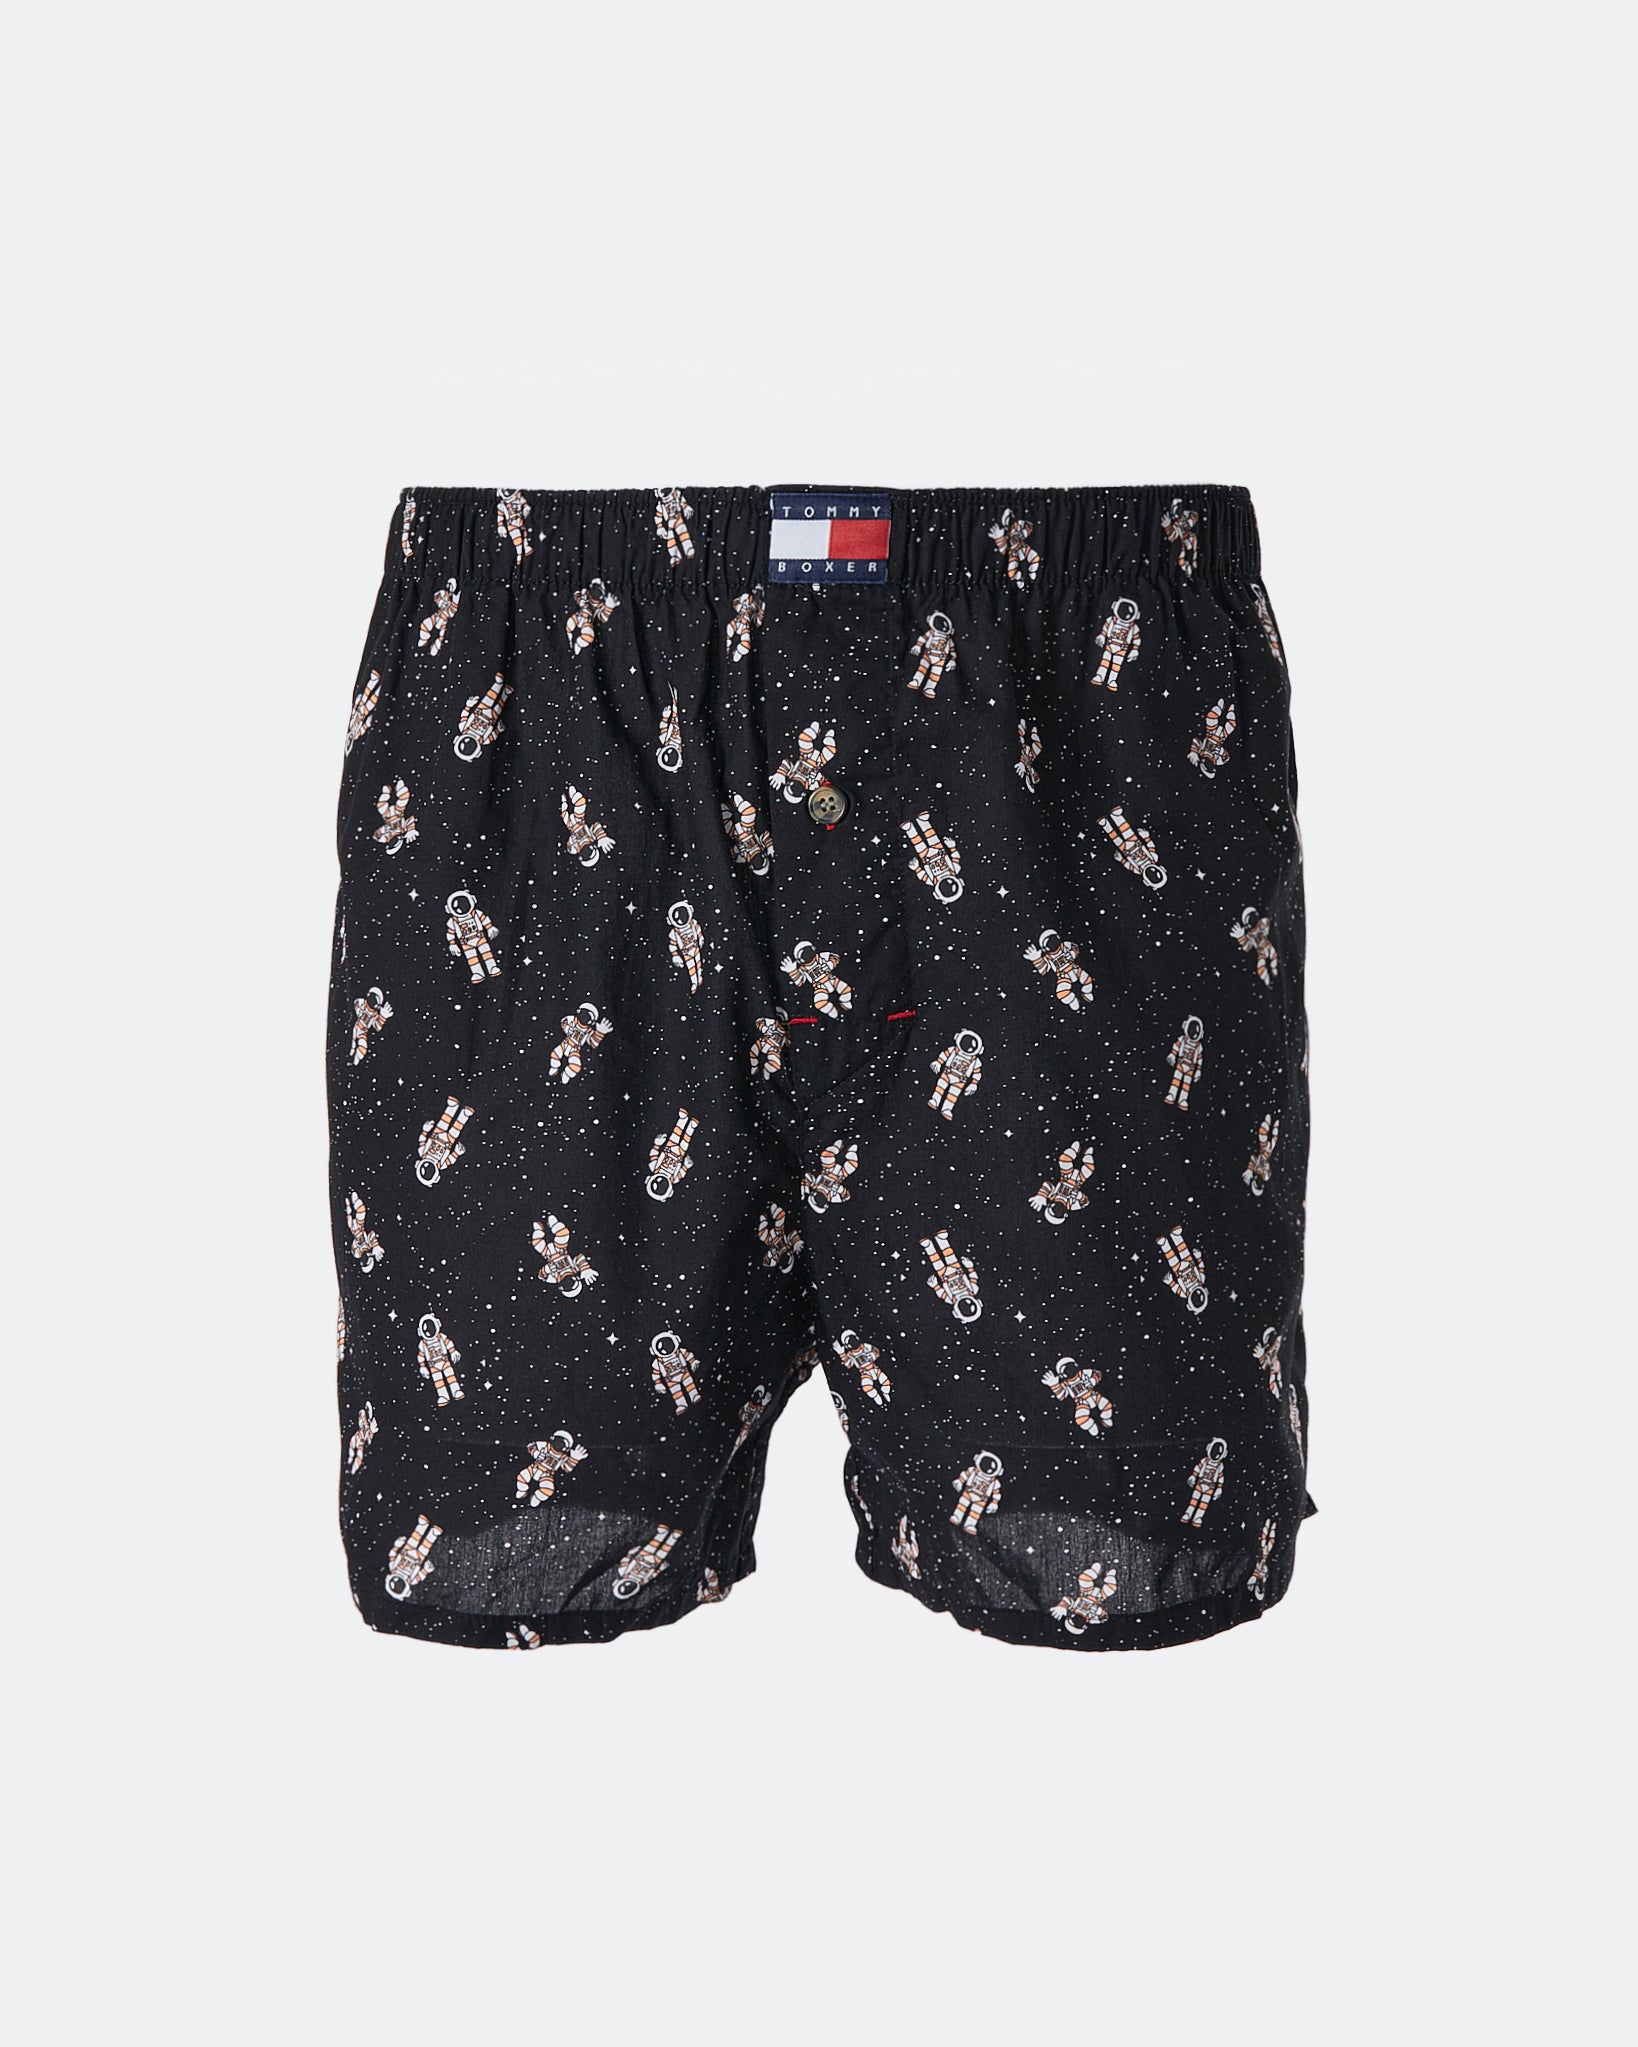 TH Astronaut Over Printed Men  Boxer 6.90